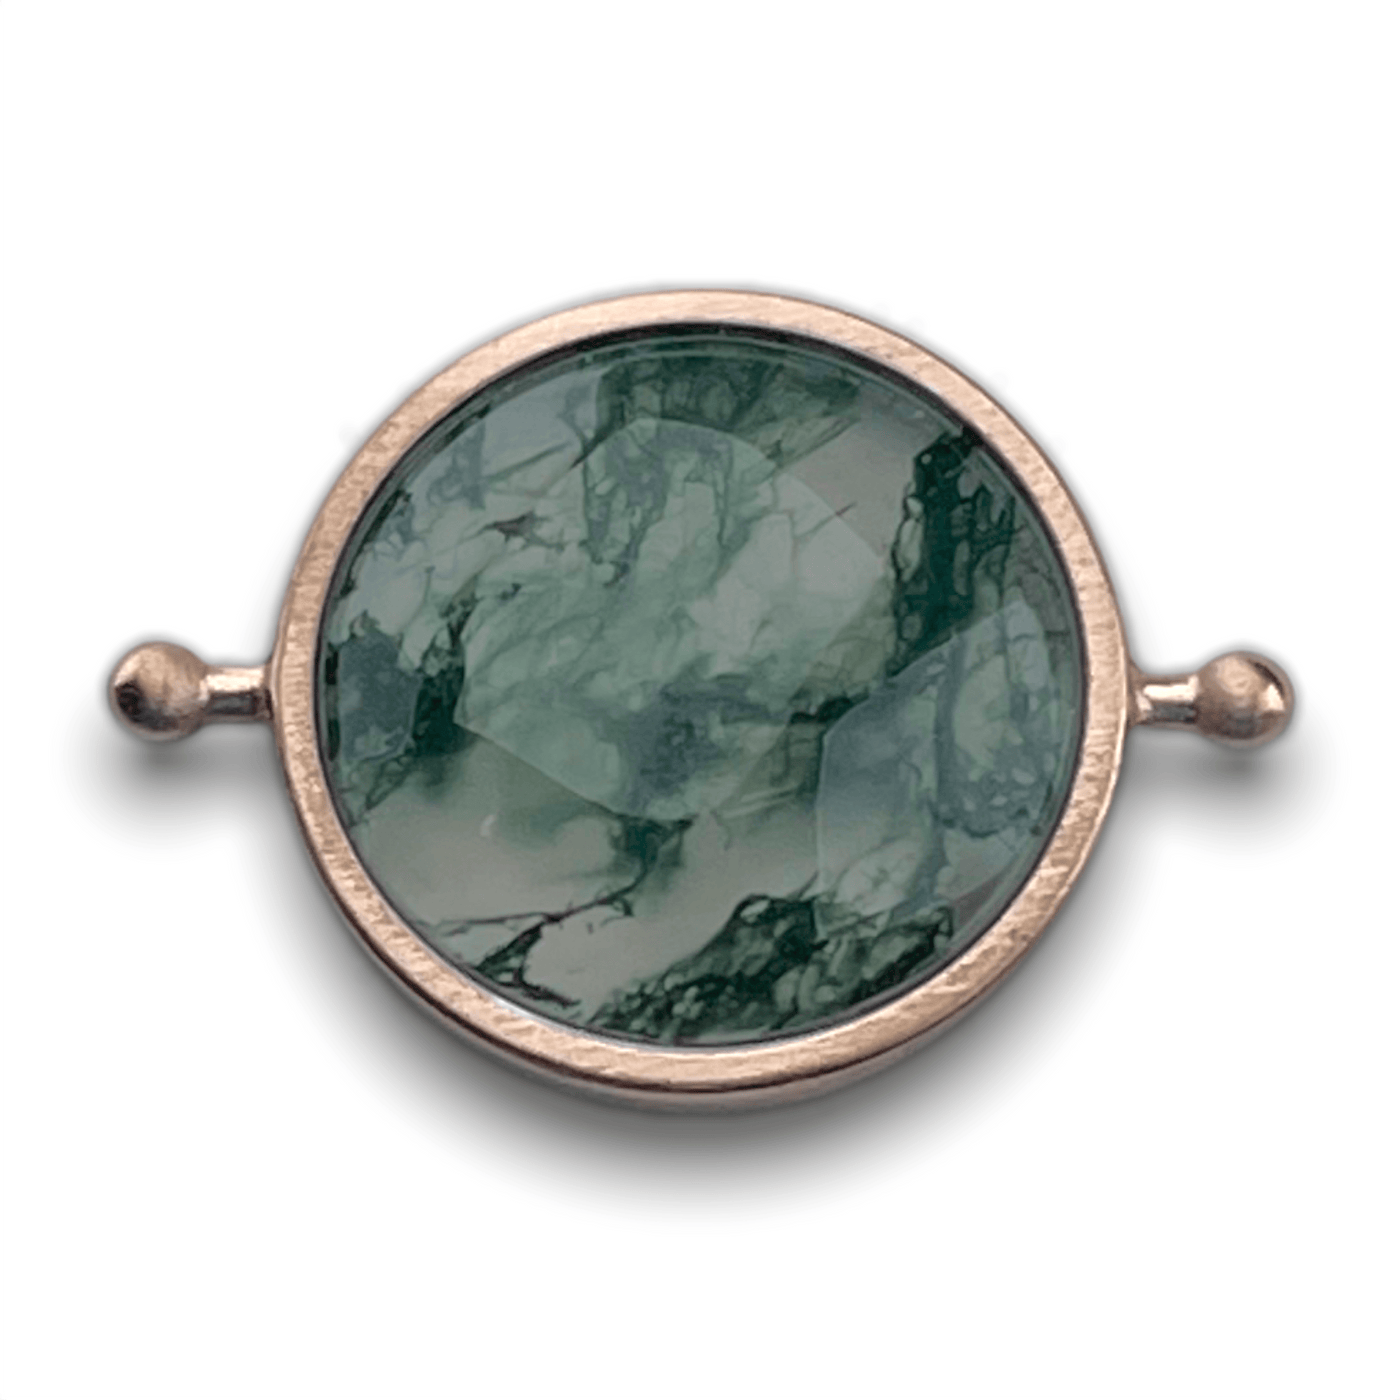 Moss Agate Round Crystal Element